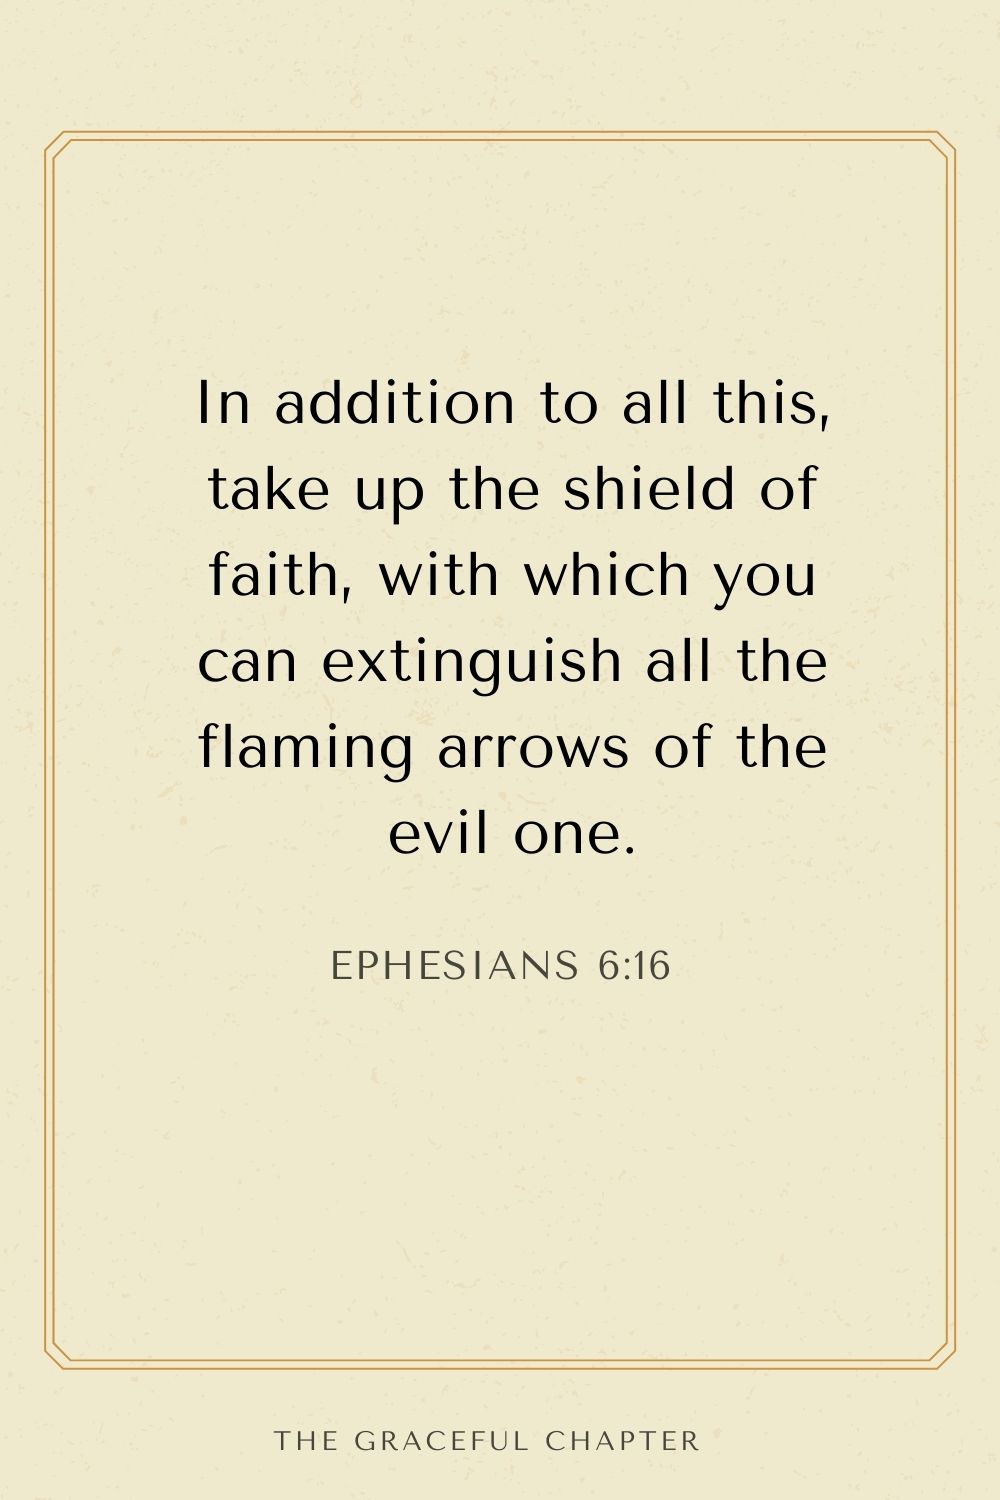 In addition to all this, take up the shield of faith, with which you can extinguish all the flaming arrows of the evil one. Ephesians 6:16